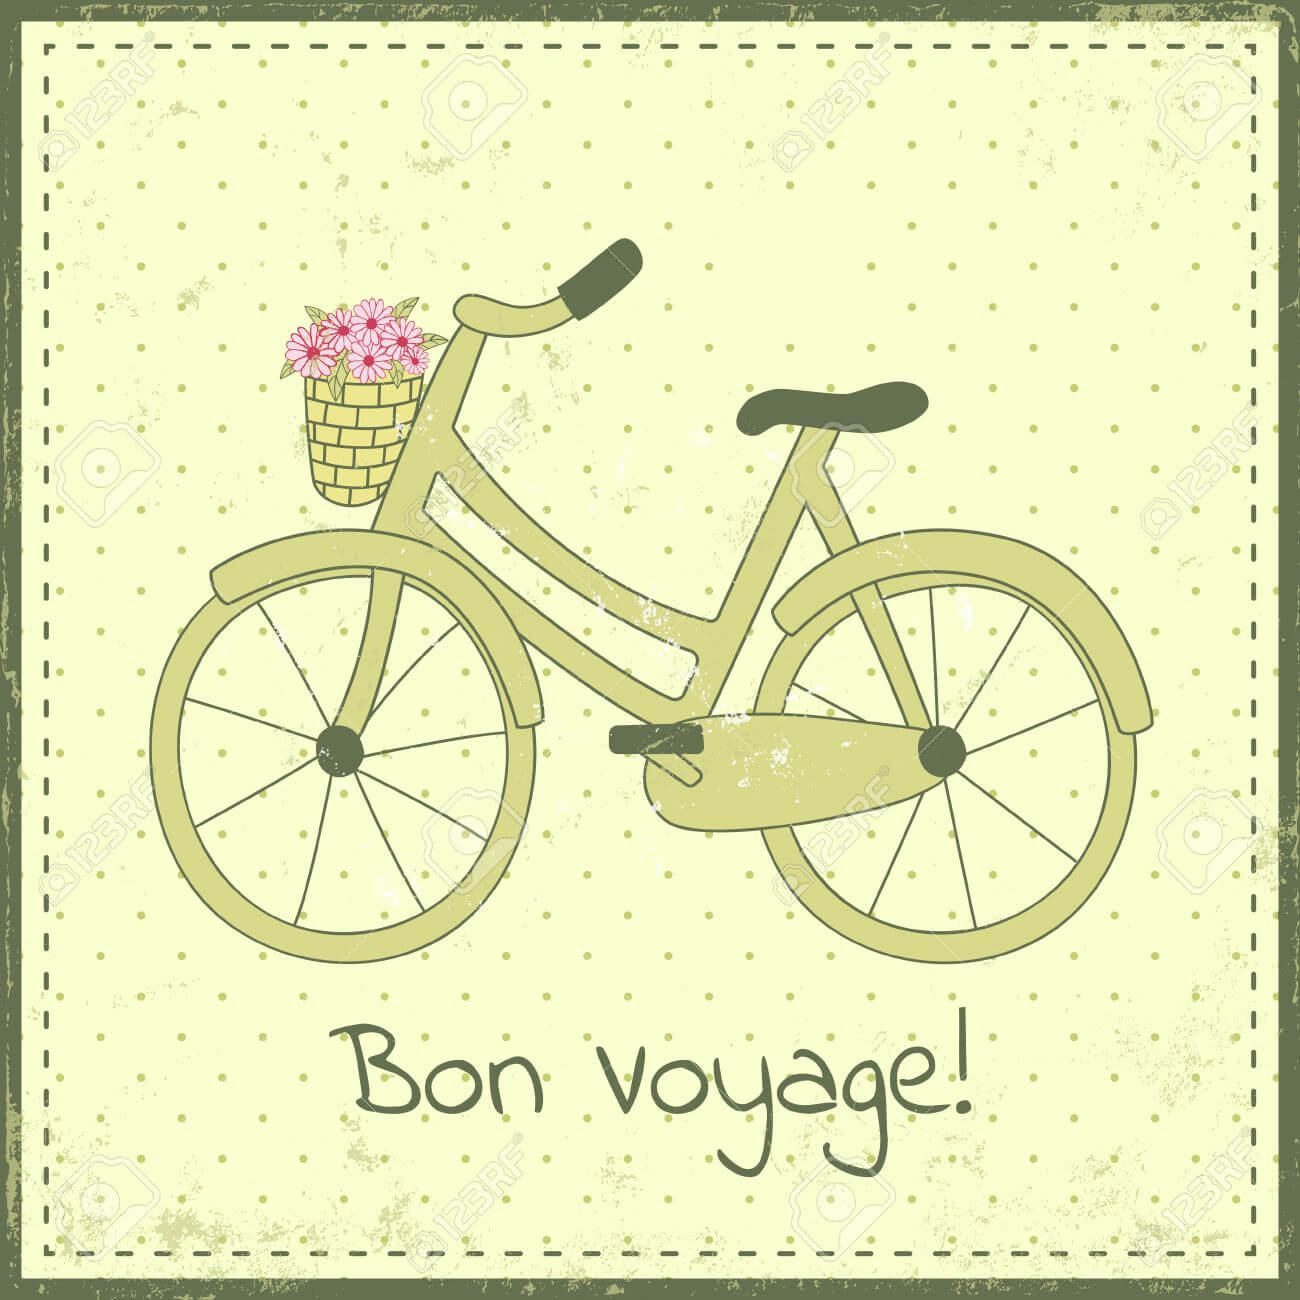 Greeting Card Template With Bike Illustration And Regarding Bon Voyage Card Template